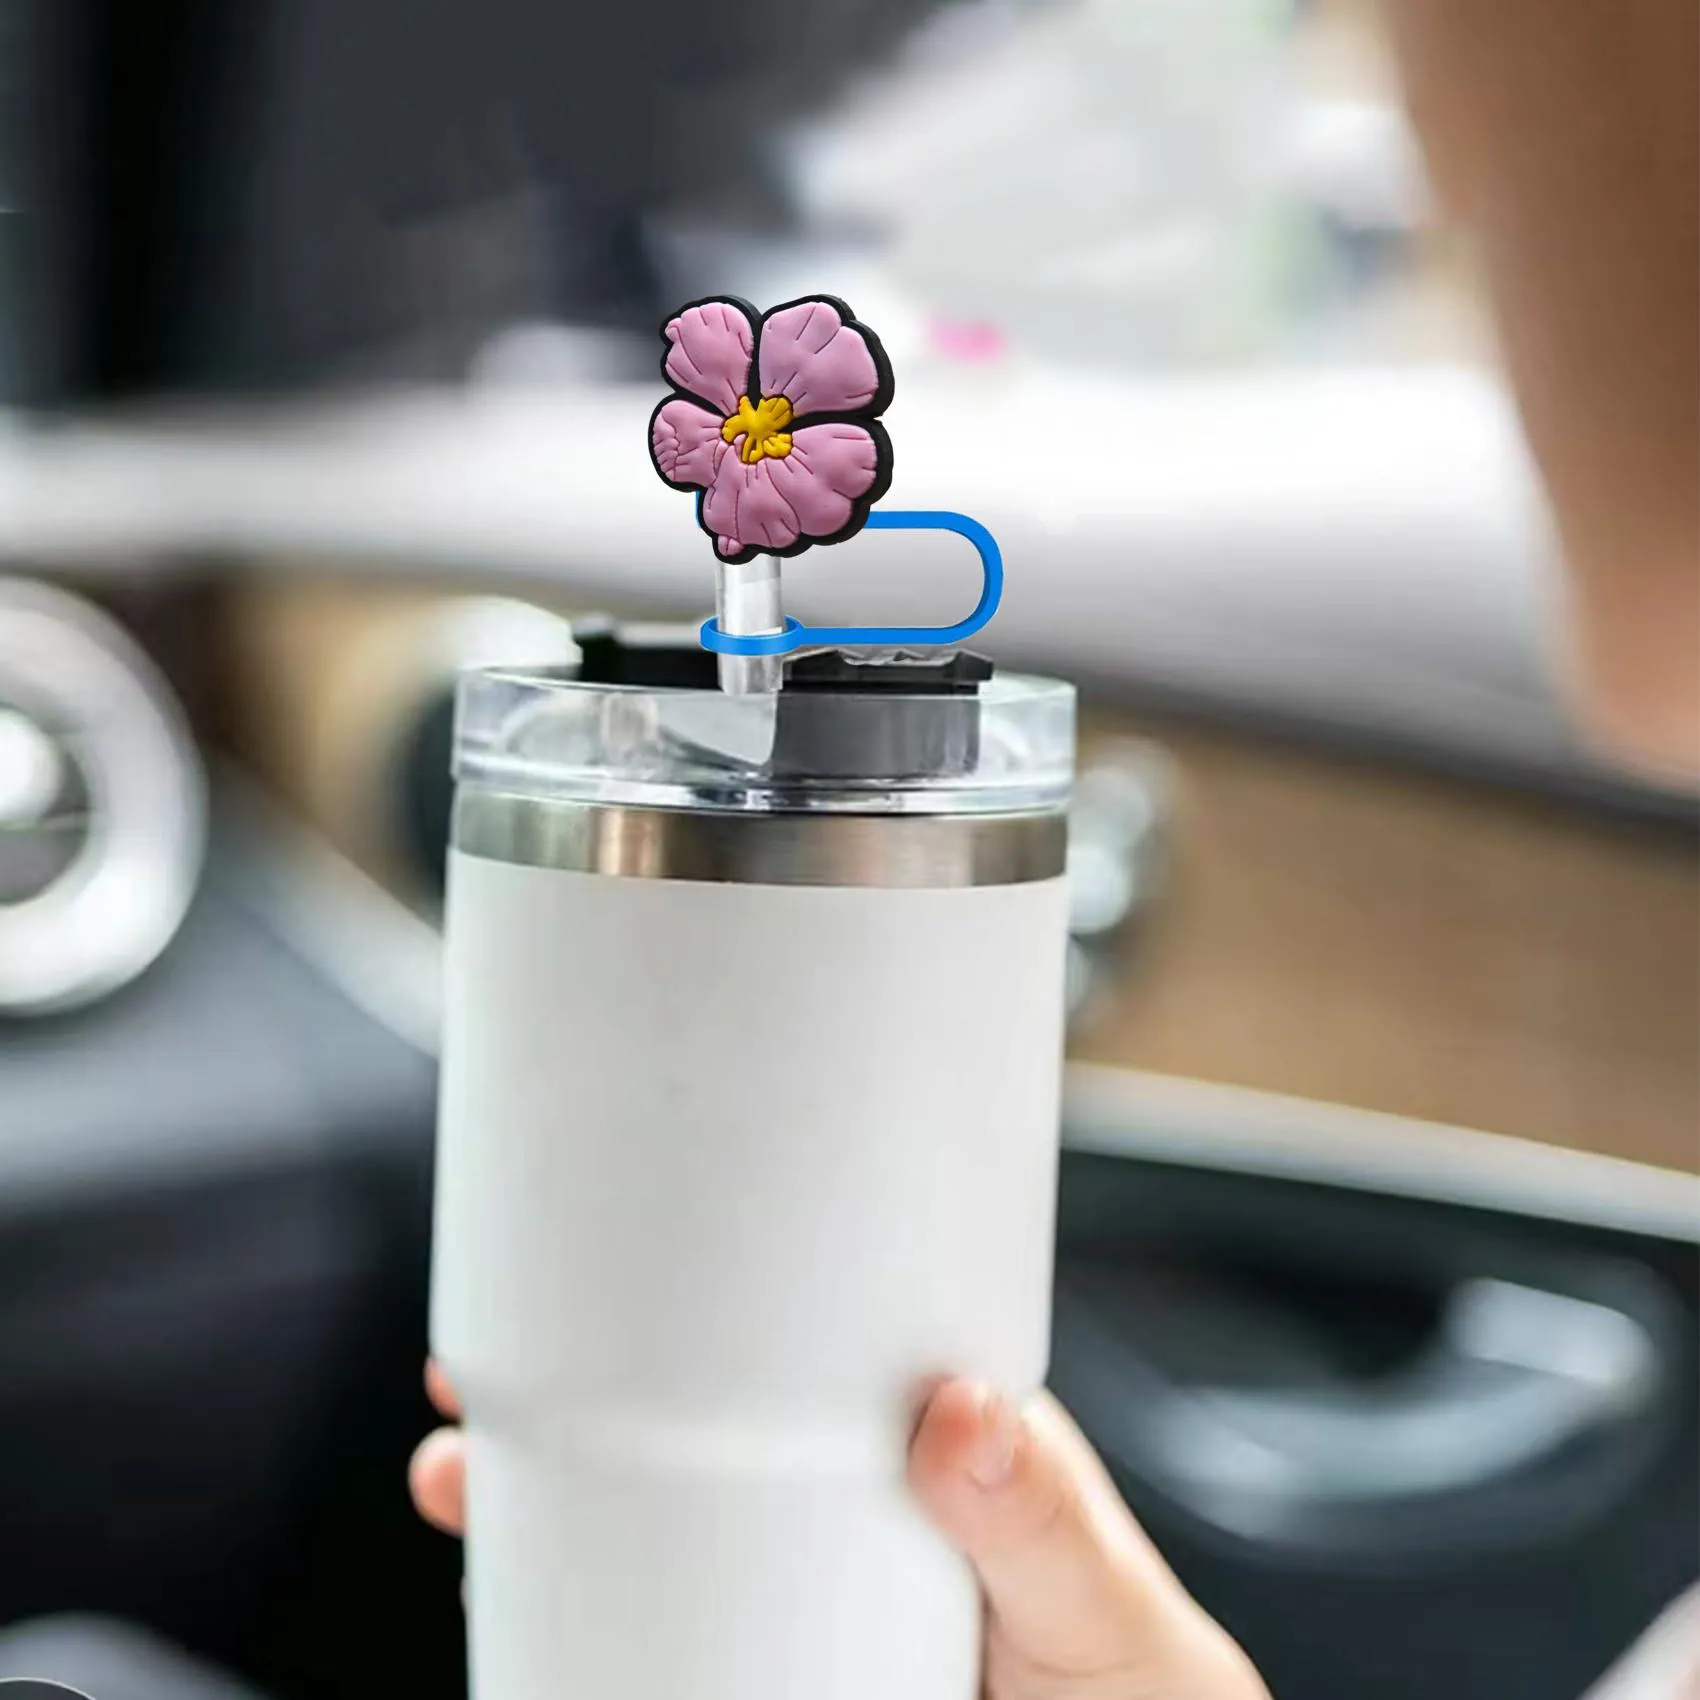 flower 2 11 straw cover for  cups drinking covers dust-proof protector topper reusable tips lids cap fit cup